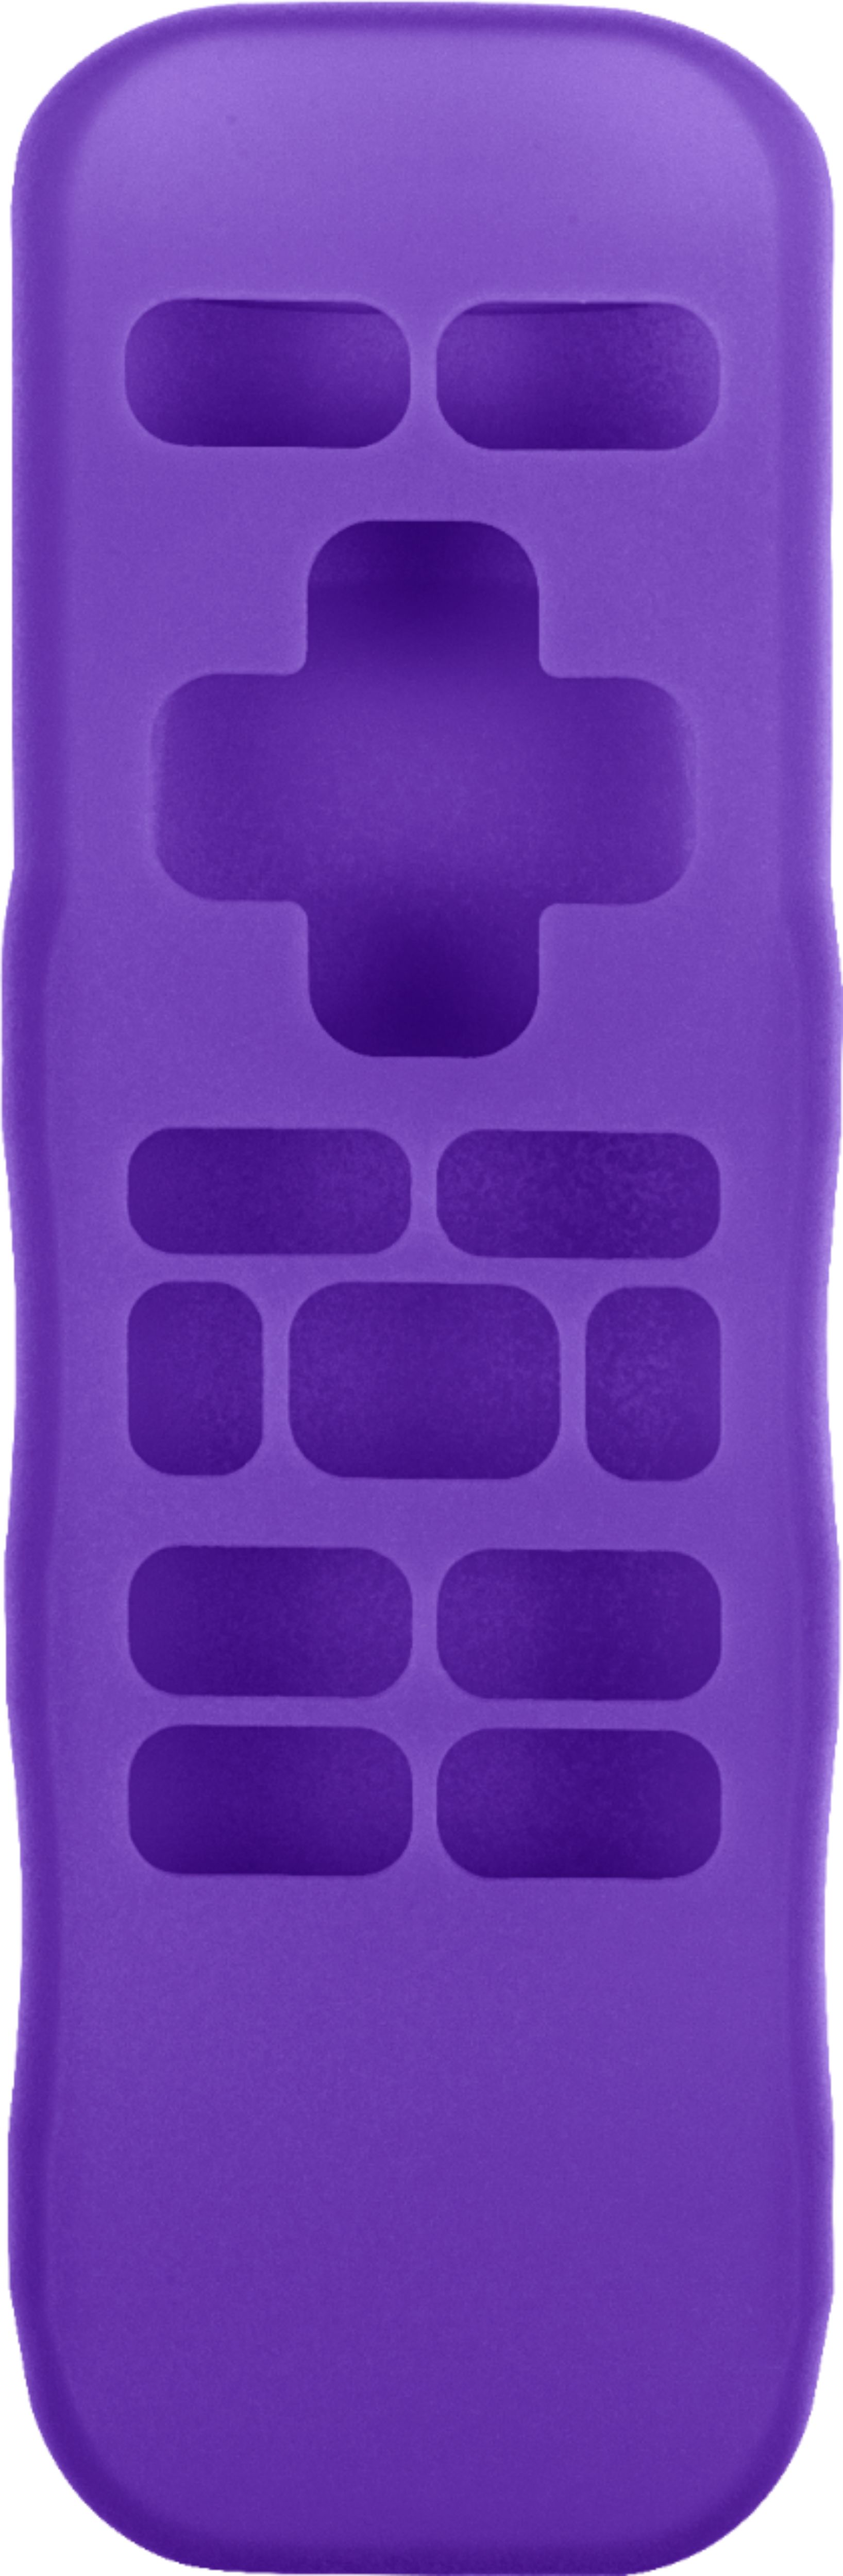 Left View: Insignia™ - Remote Cover for Roku Express and Premiere - Purple